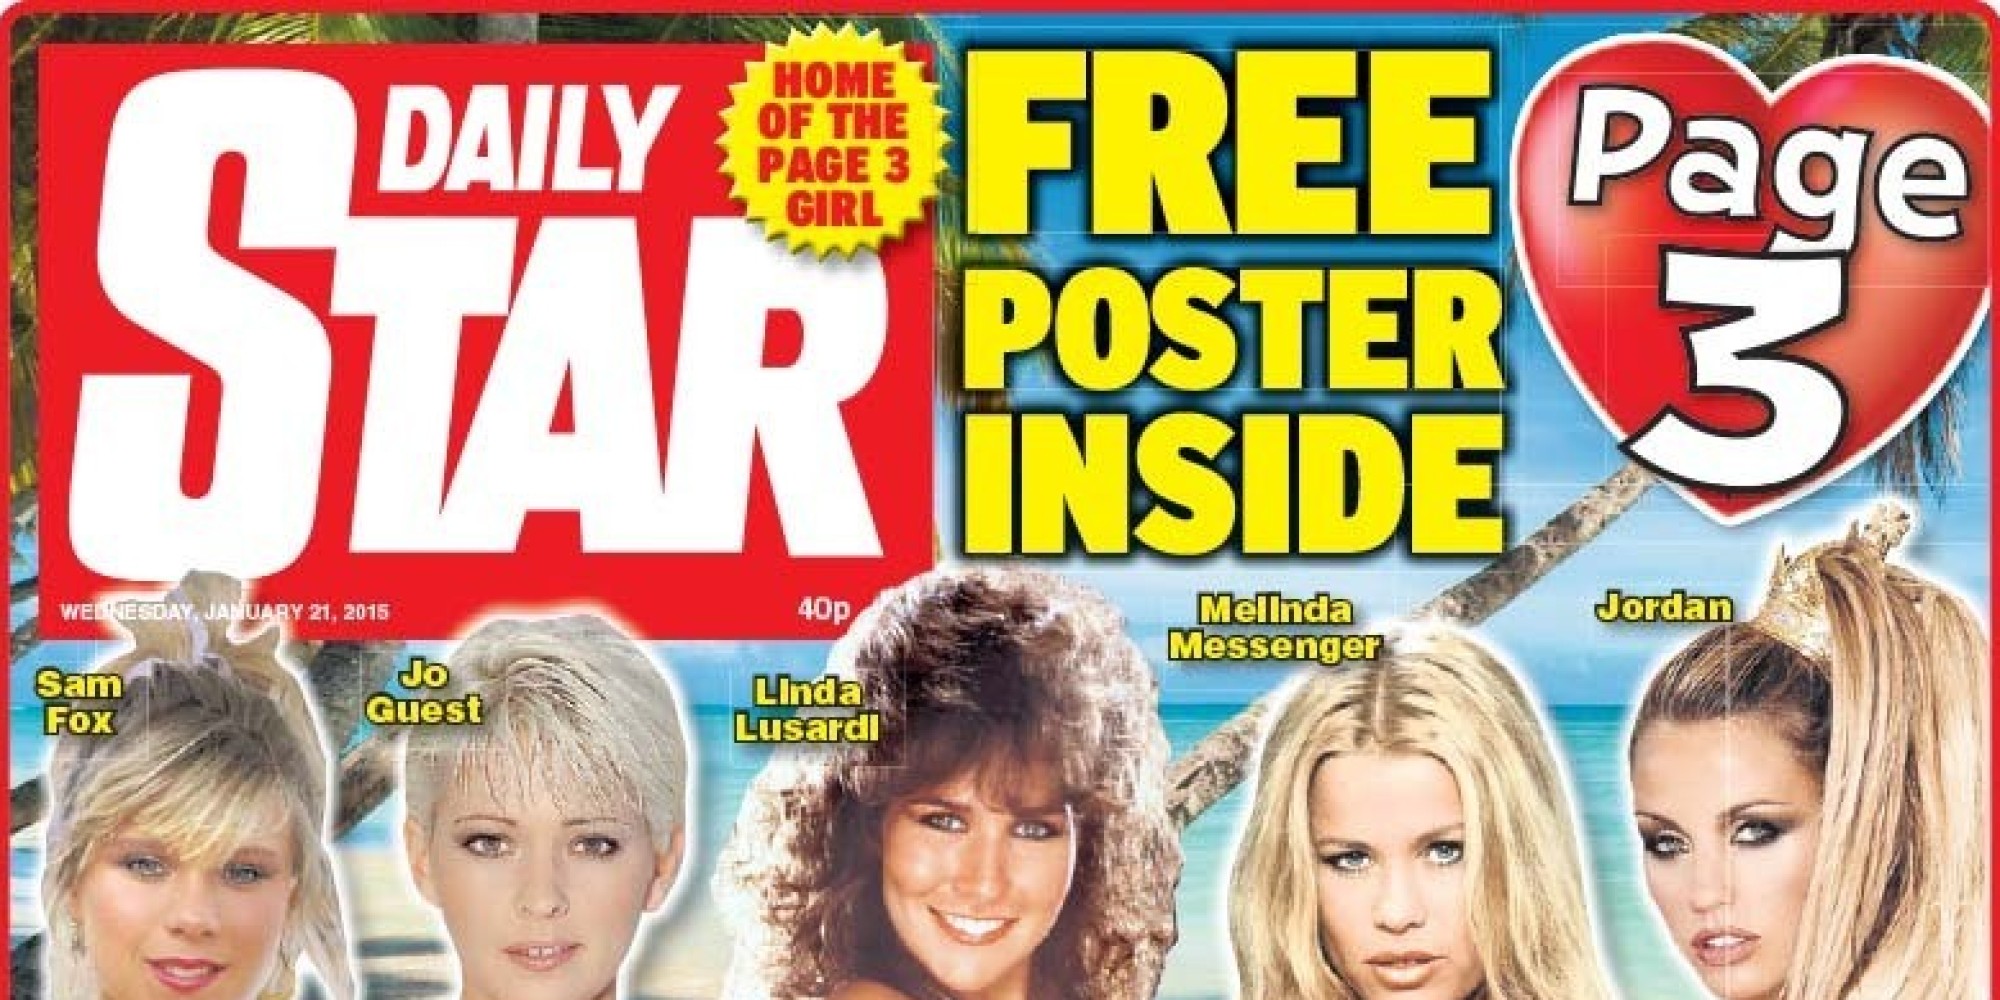 Daily Star supplement magazines are renamed - ResponseSource